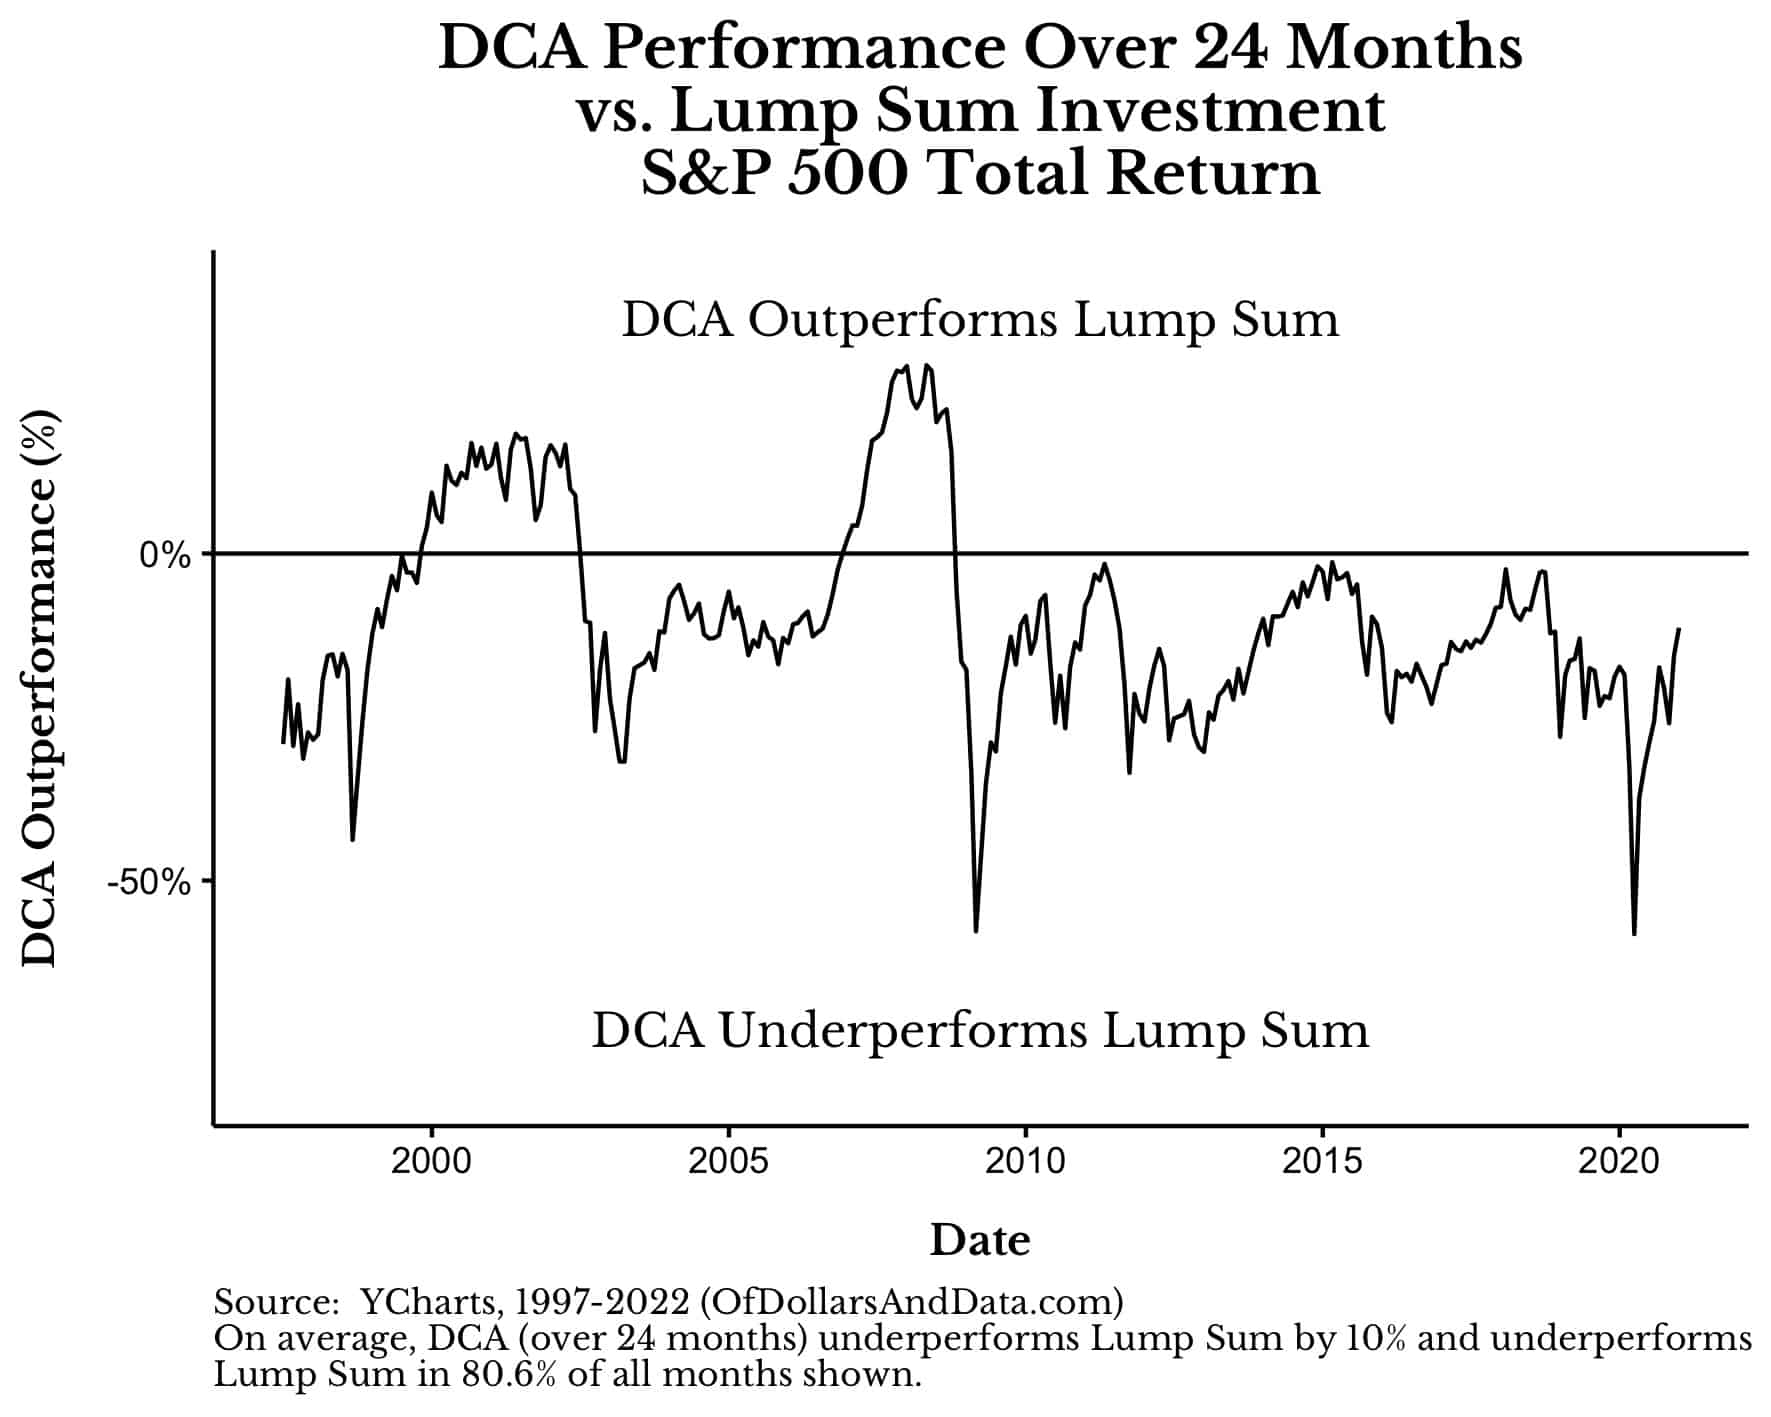 DCA vs Lump Sum performance over 24 months into the S&P 500 from 1997-2022.